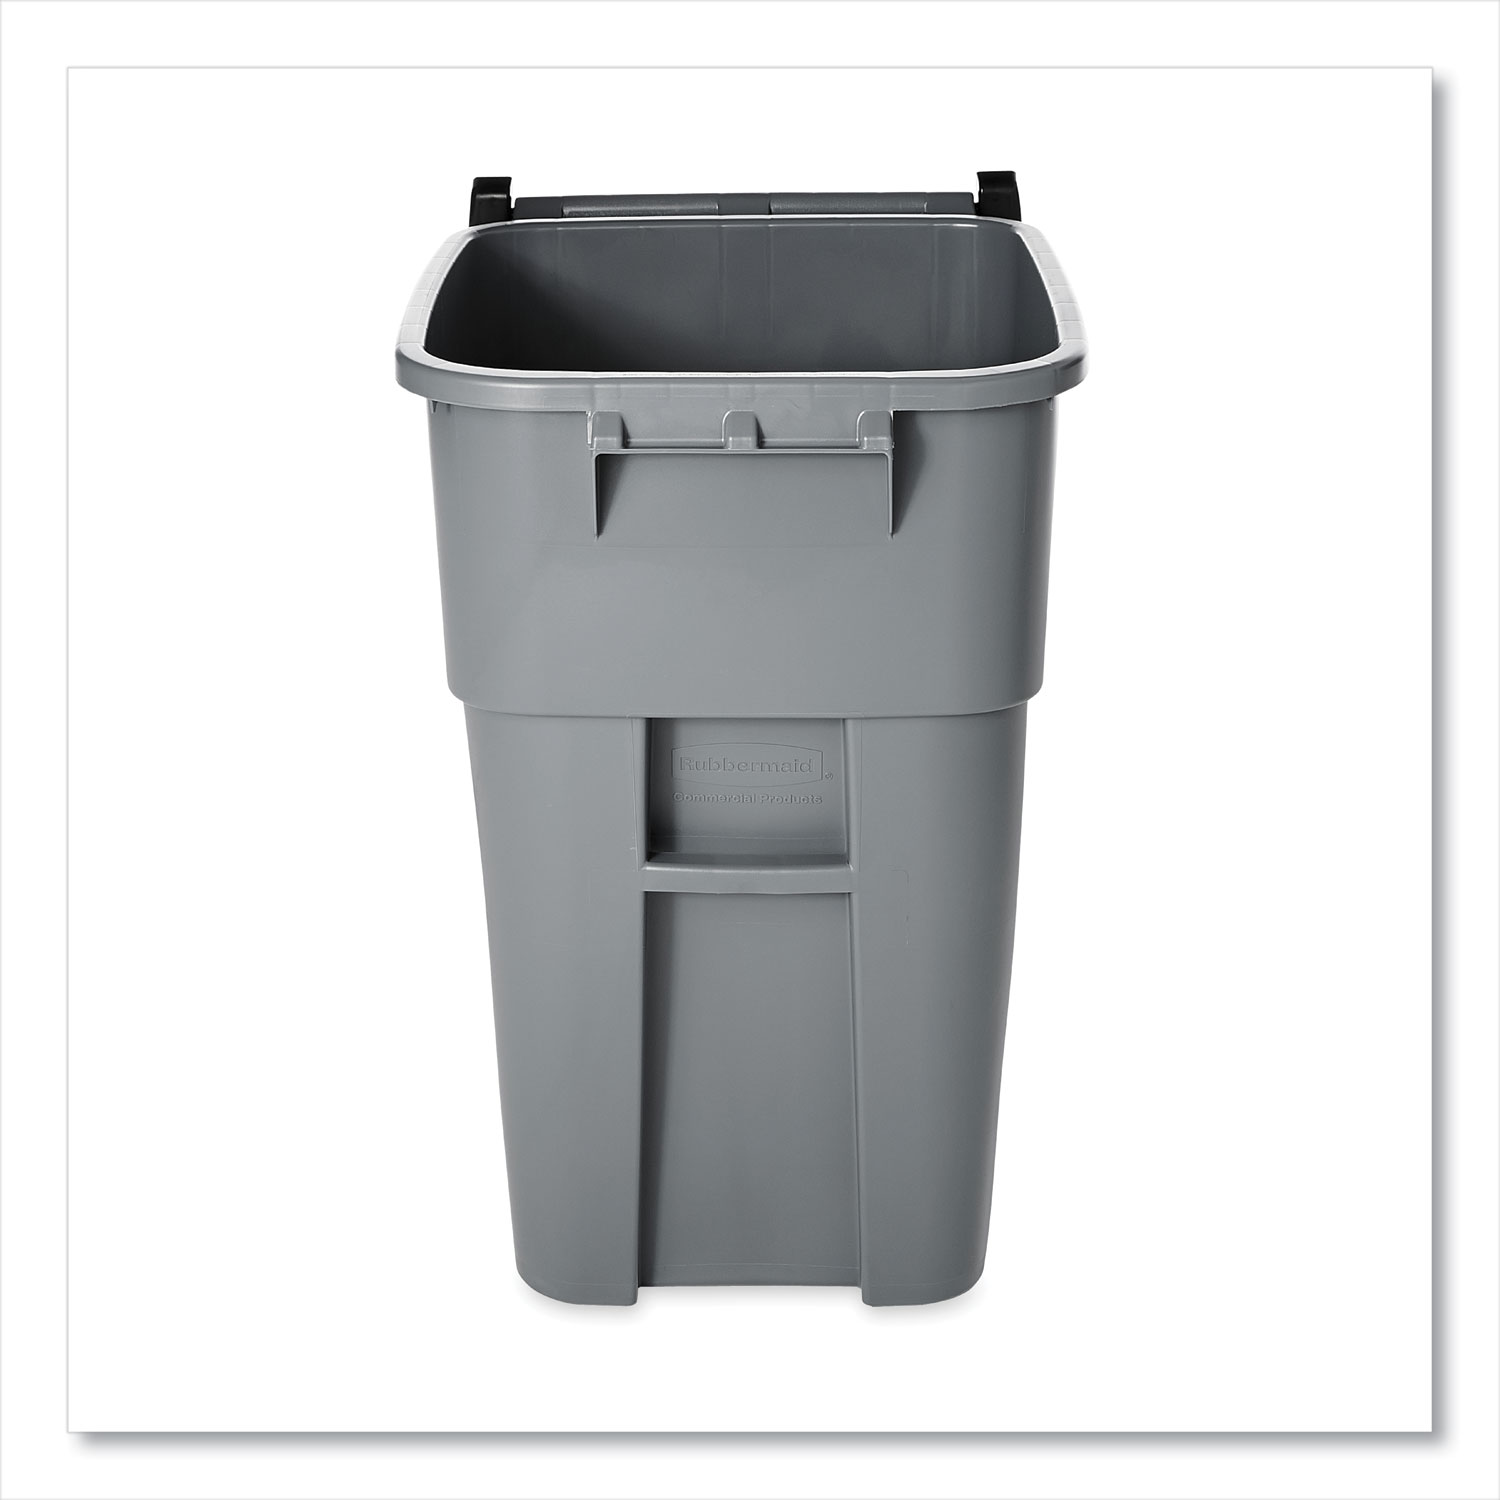 Brute 95 Gal. Gray Polyethylene Rollout Heavy-Duty Waste Container